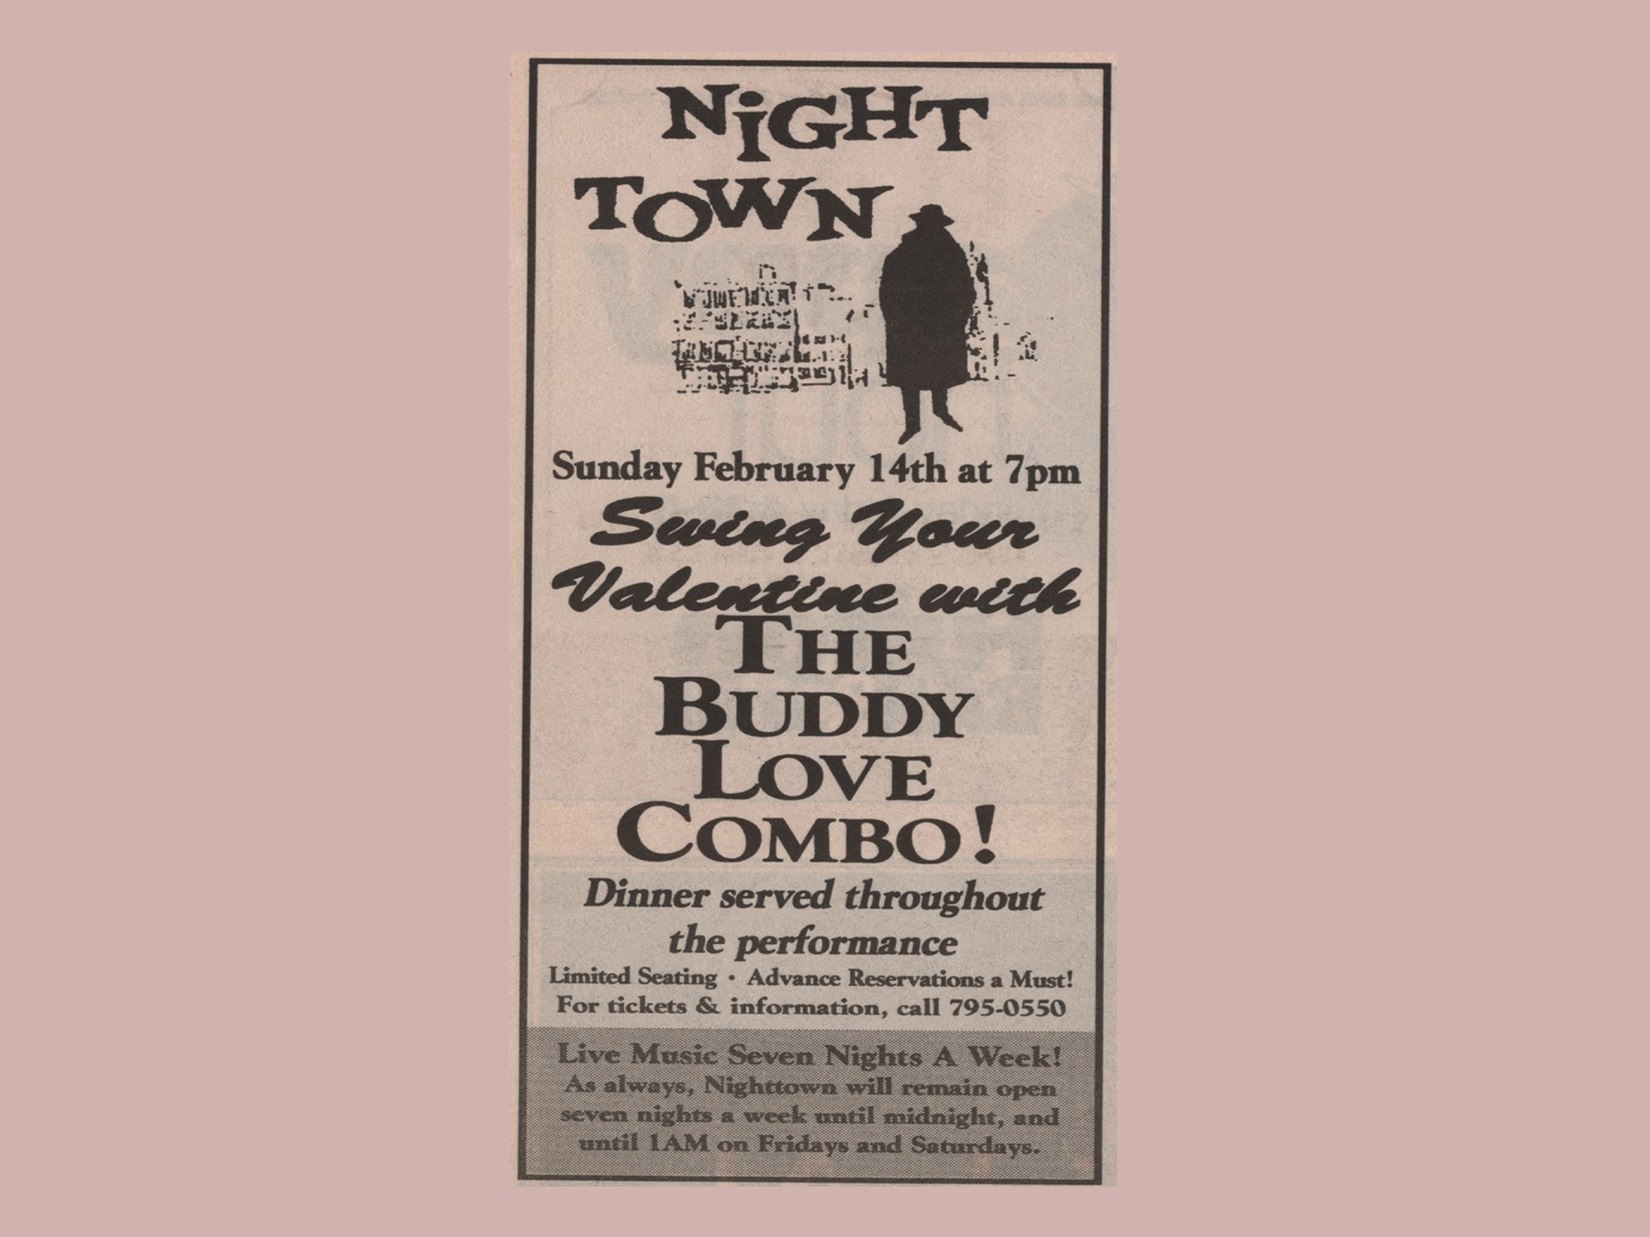 Buddy Love Combo Valentine's at Night Town in 2000